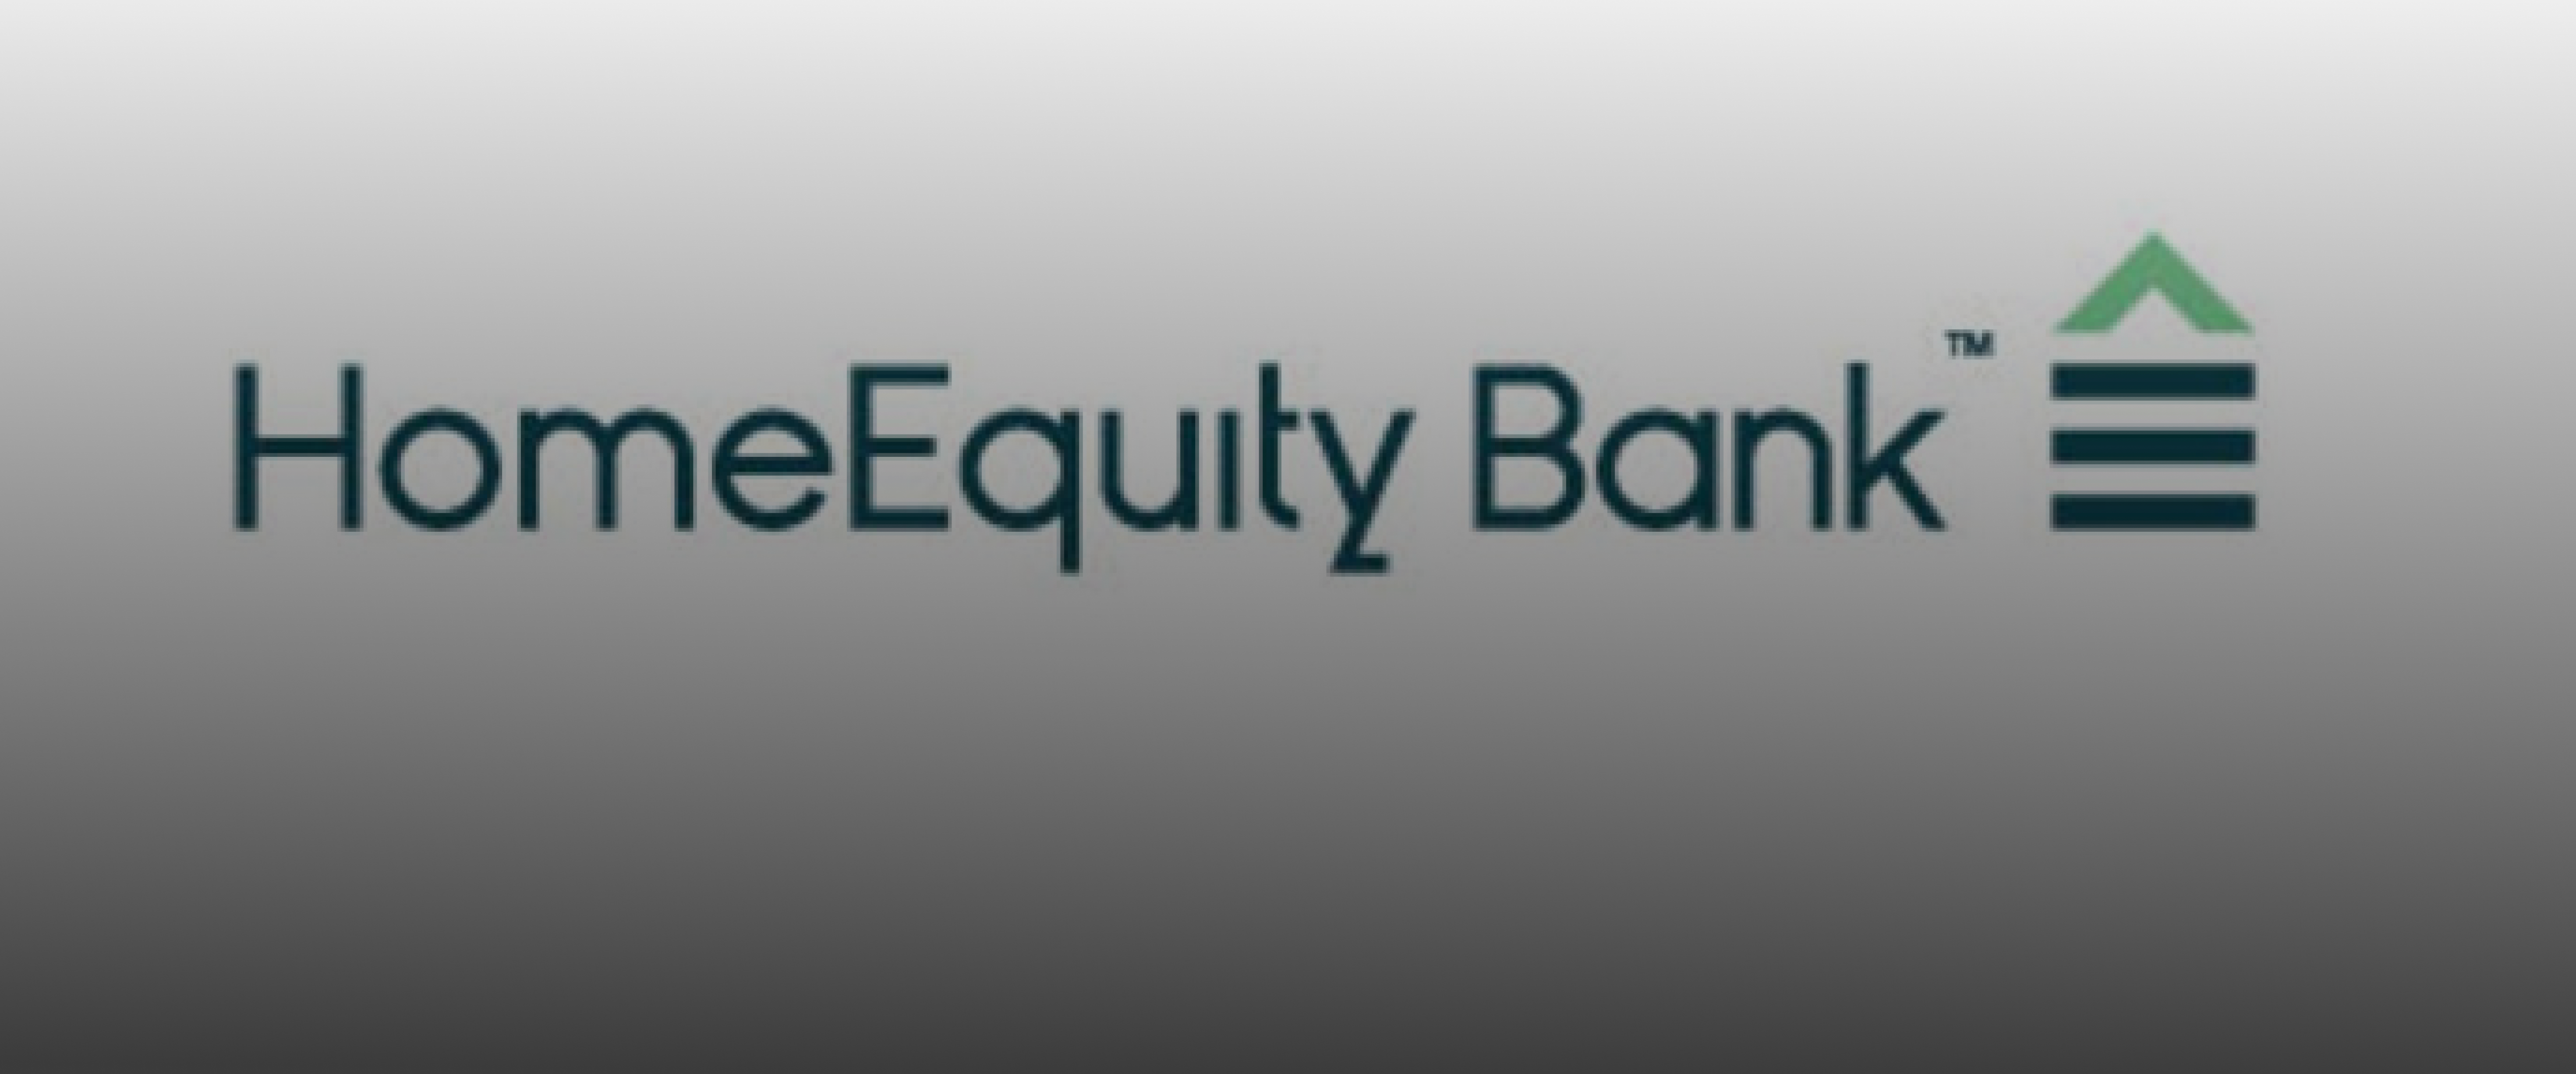 Home Equity bank case study banner image